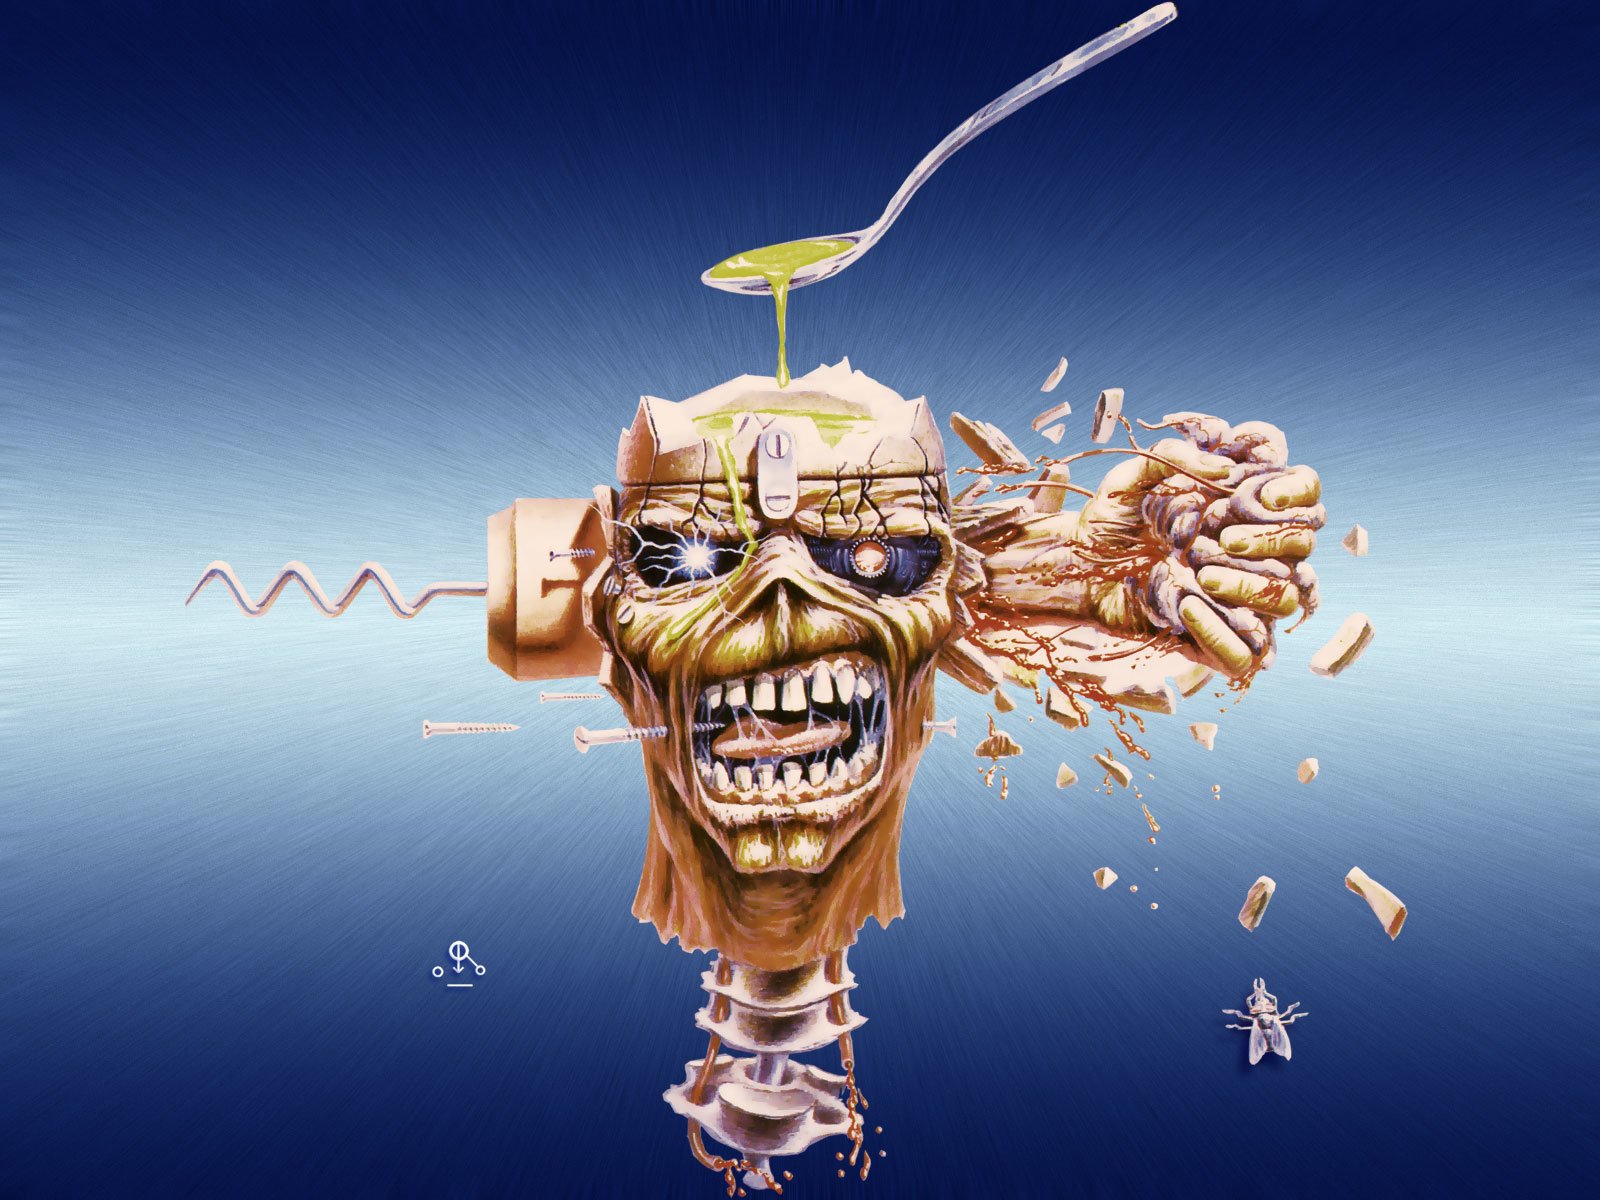 Iron Maiden Wallpaper and Background Image | 1600x1200 ...